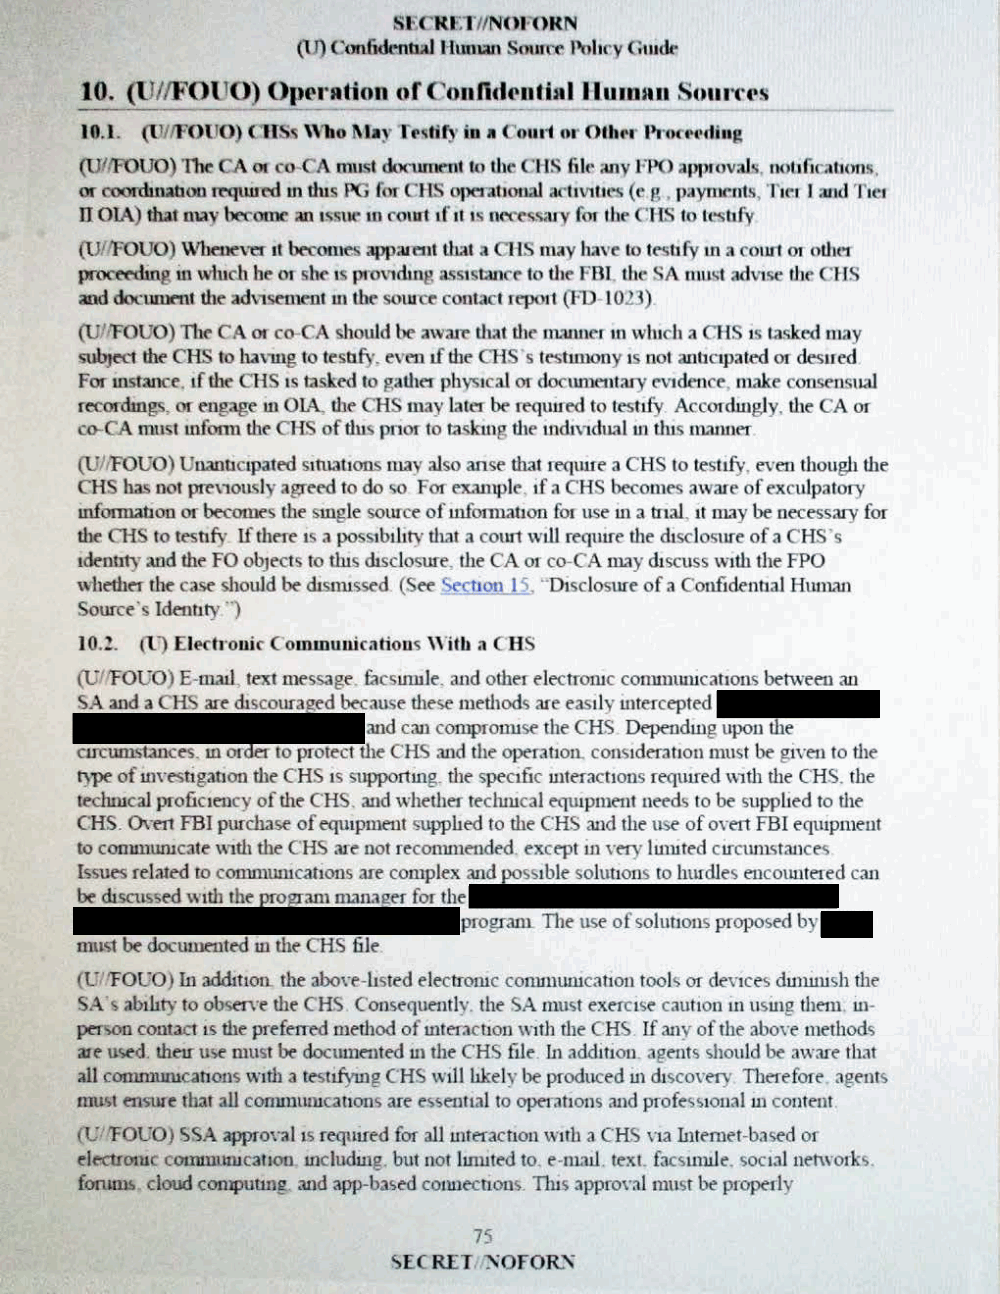 Page 85 from Confidential Human Source Policy Guide